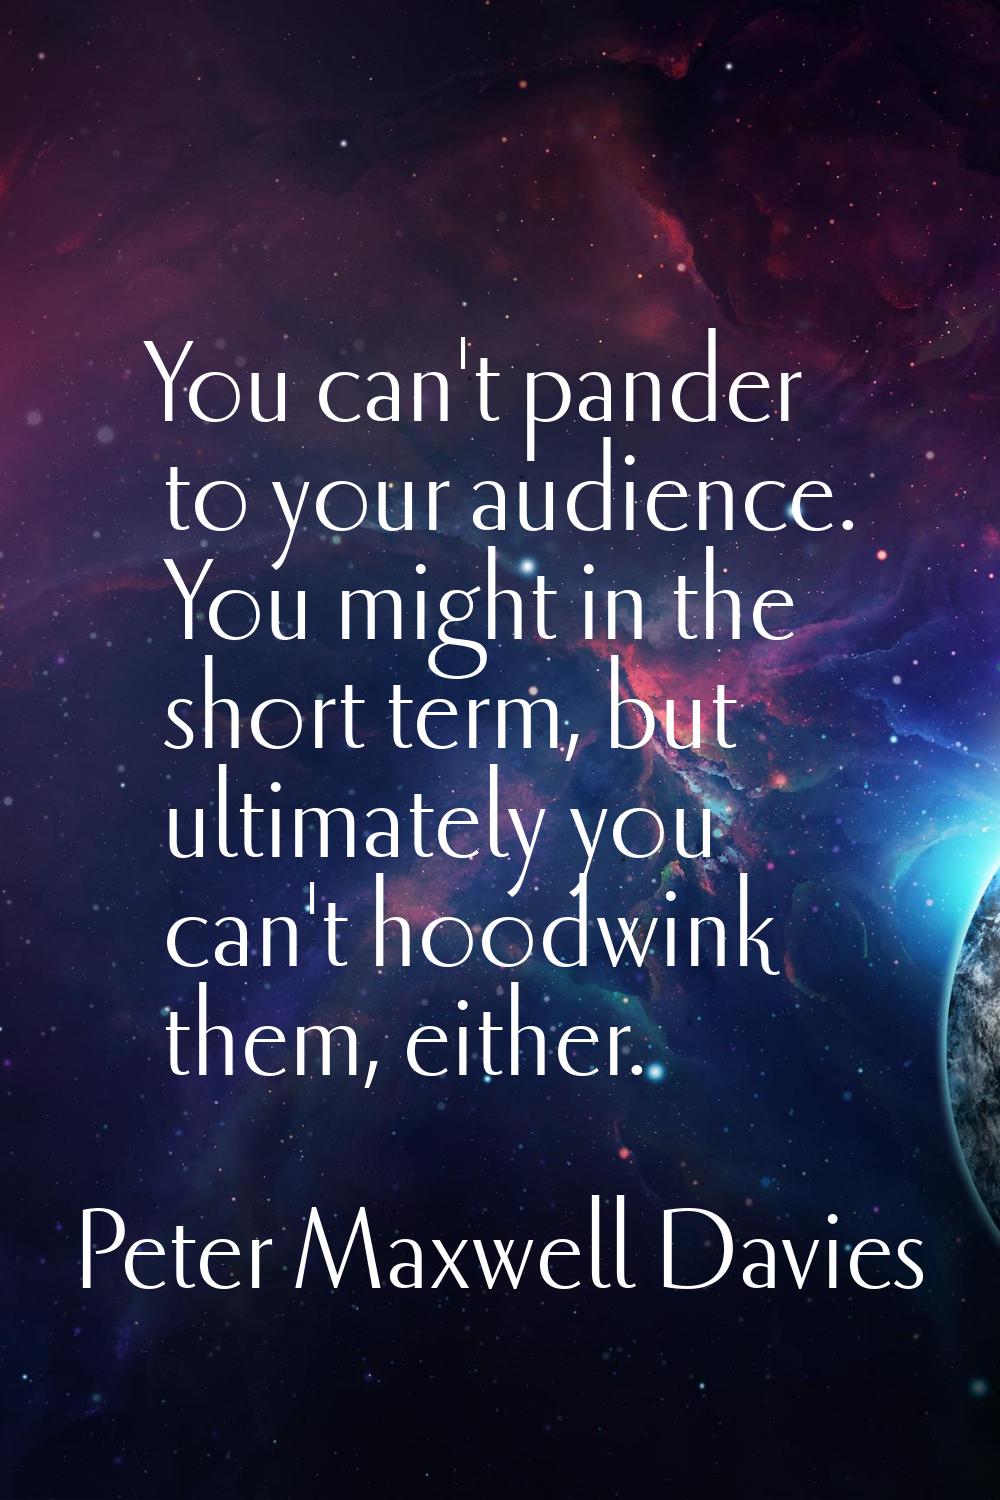 You can't pander to your audience. You might in the short term, but ultimately you can't hoodwink t